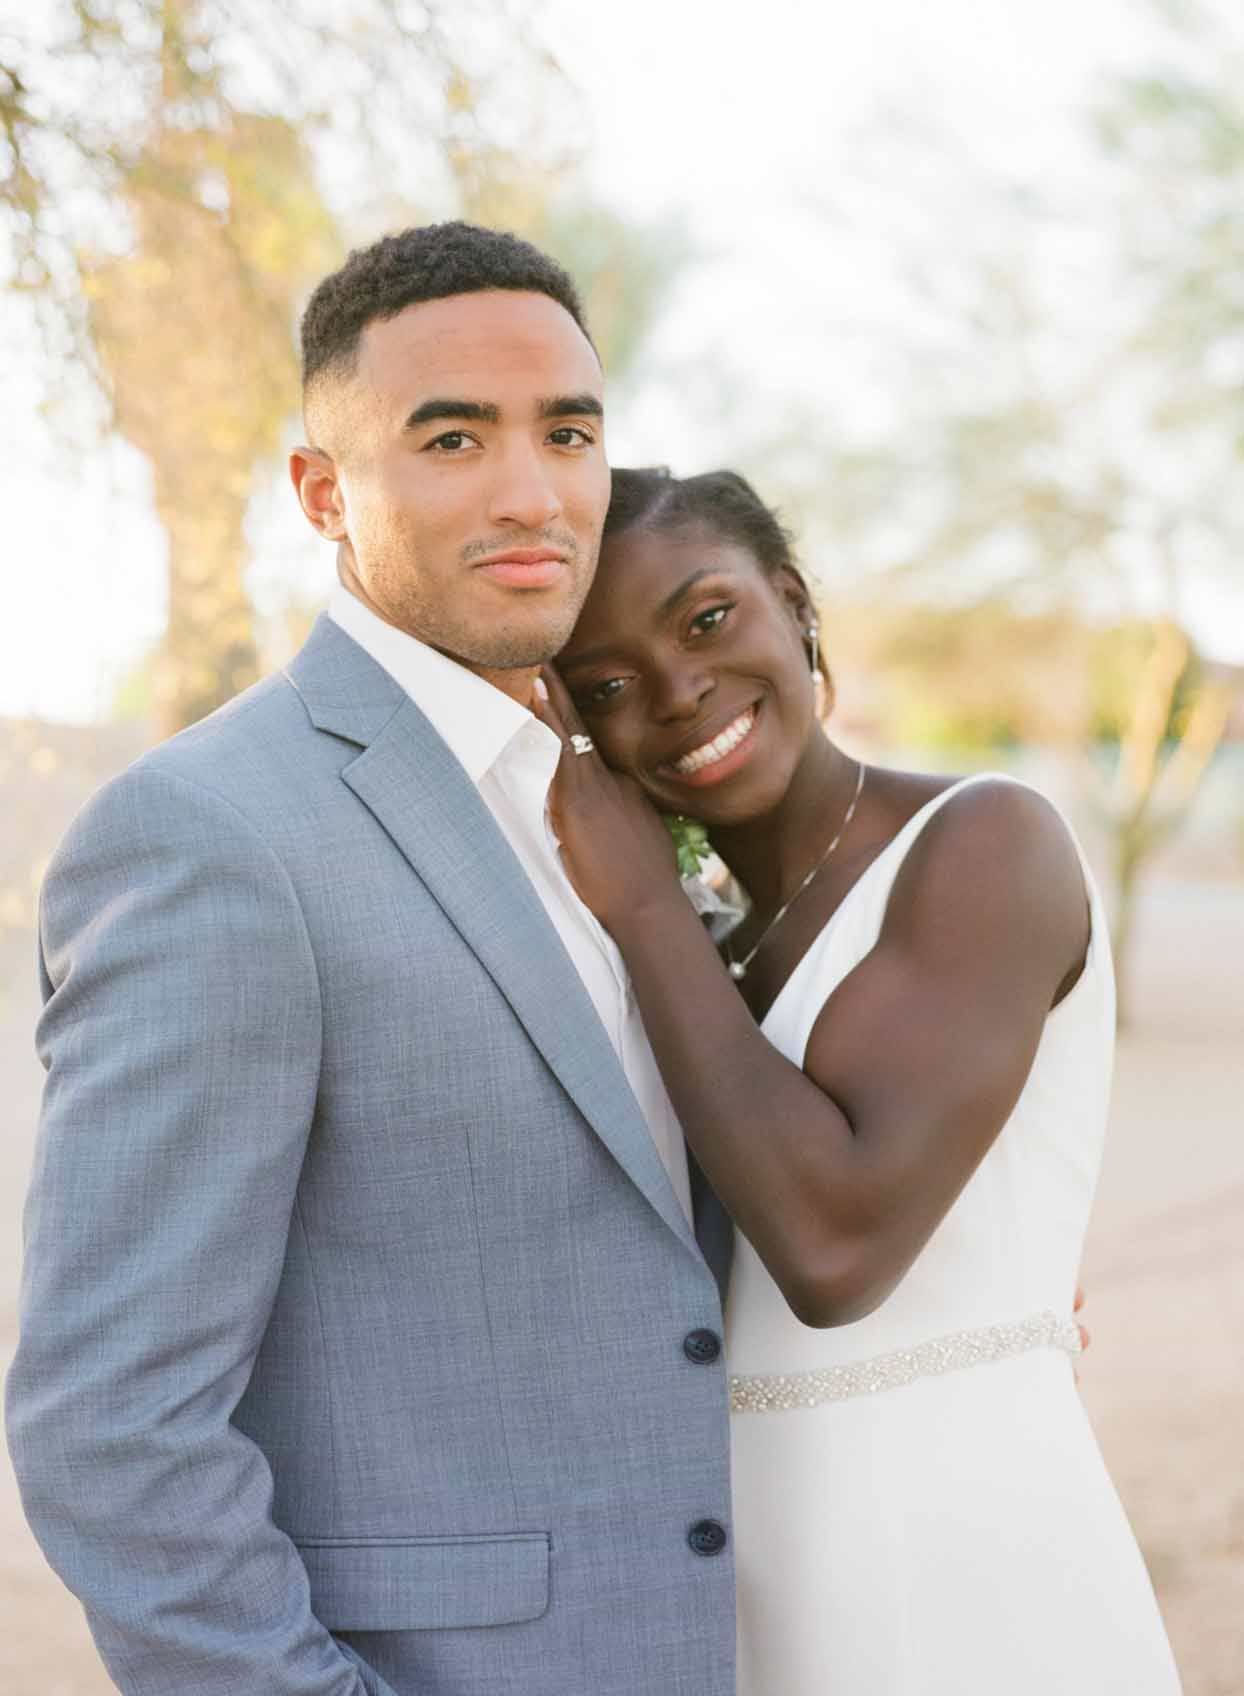 Enyo & Etienne - The Glowing Couple of This Unique Modern & Multicultural Wedding in Arizona